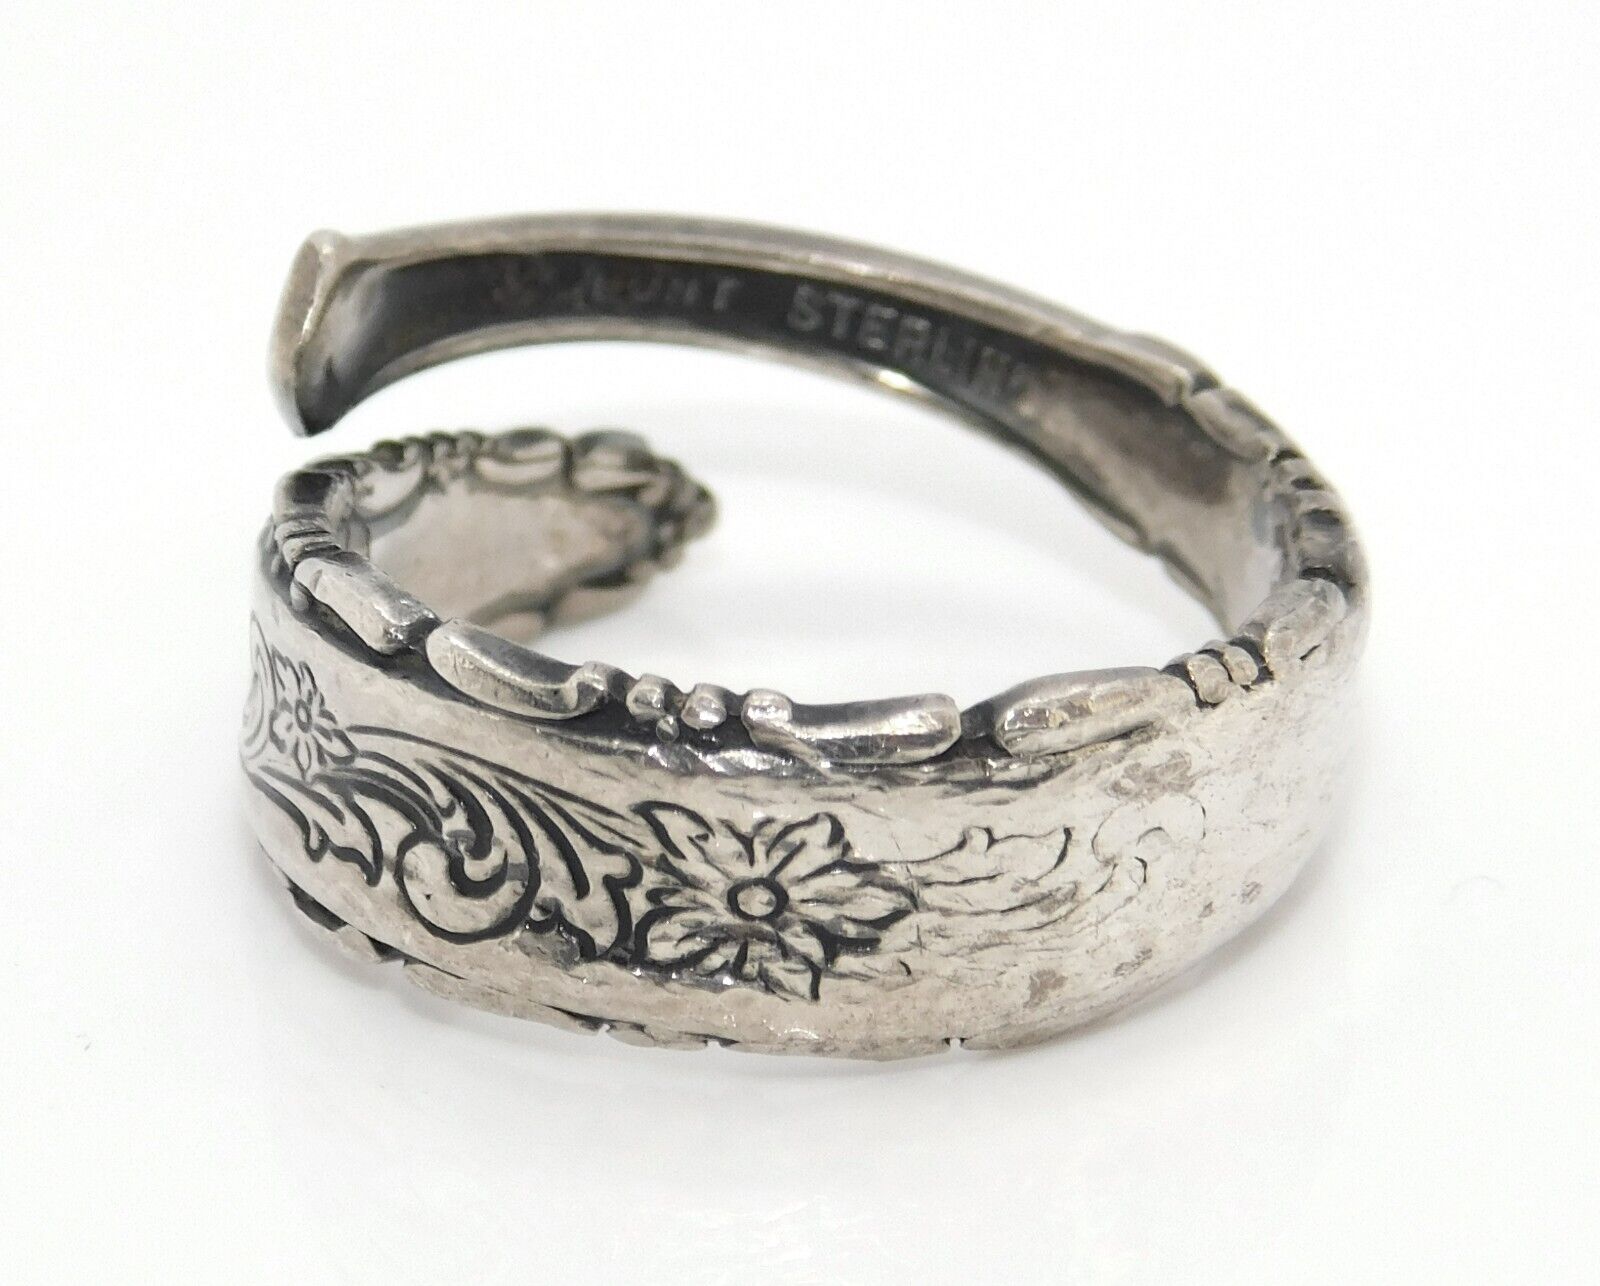 Vintage Lunt 925 Sterling Silver Spoon Wrap Ring - image 3